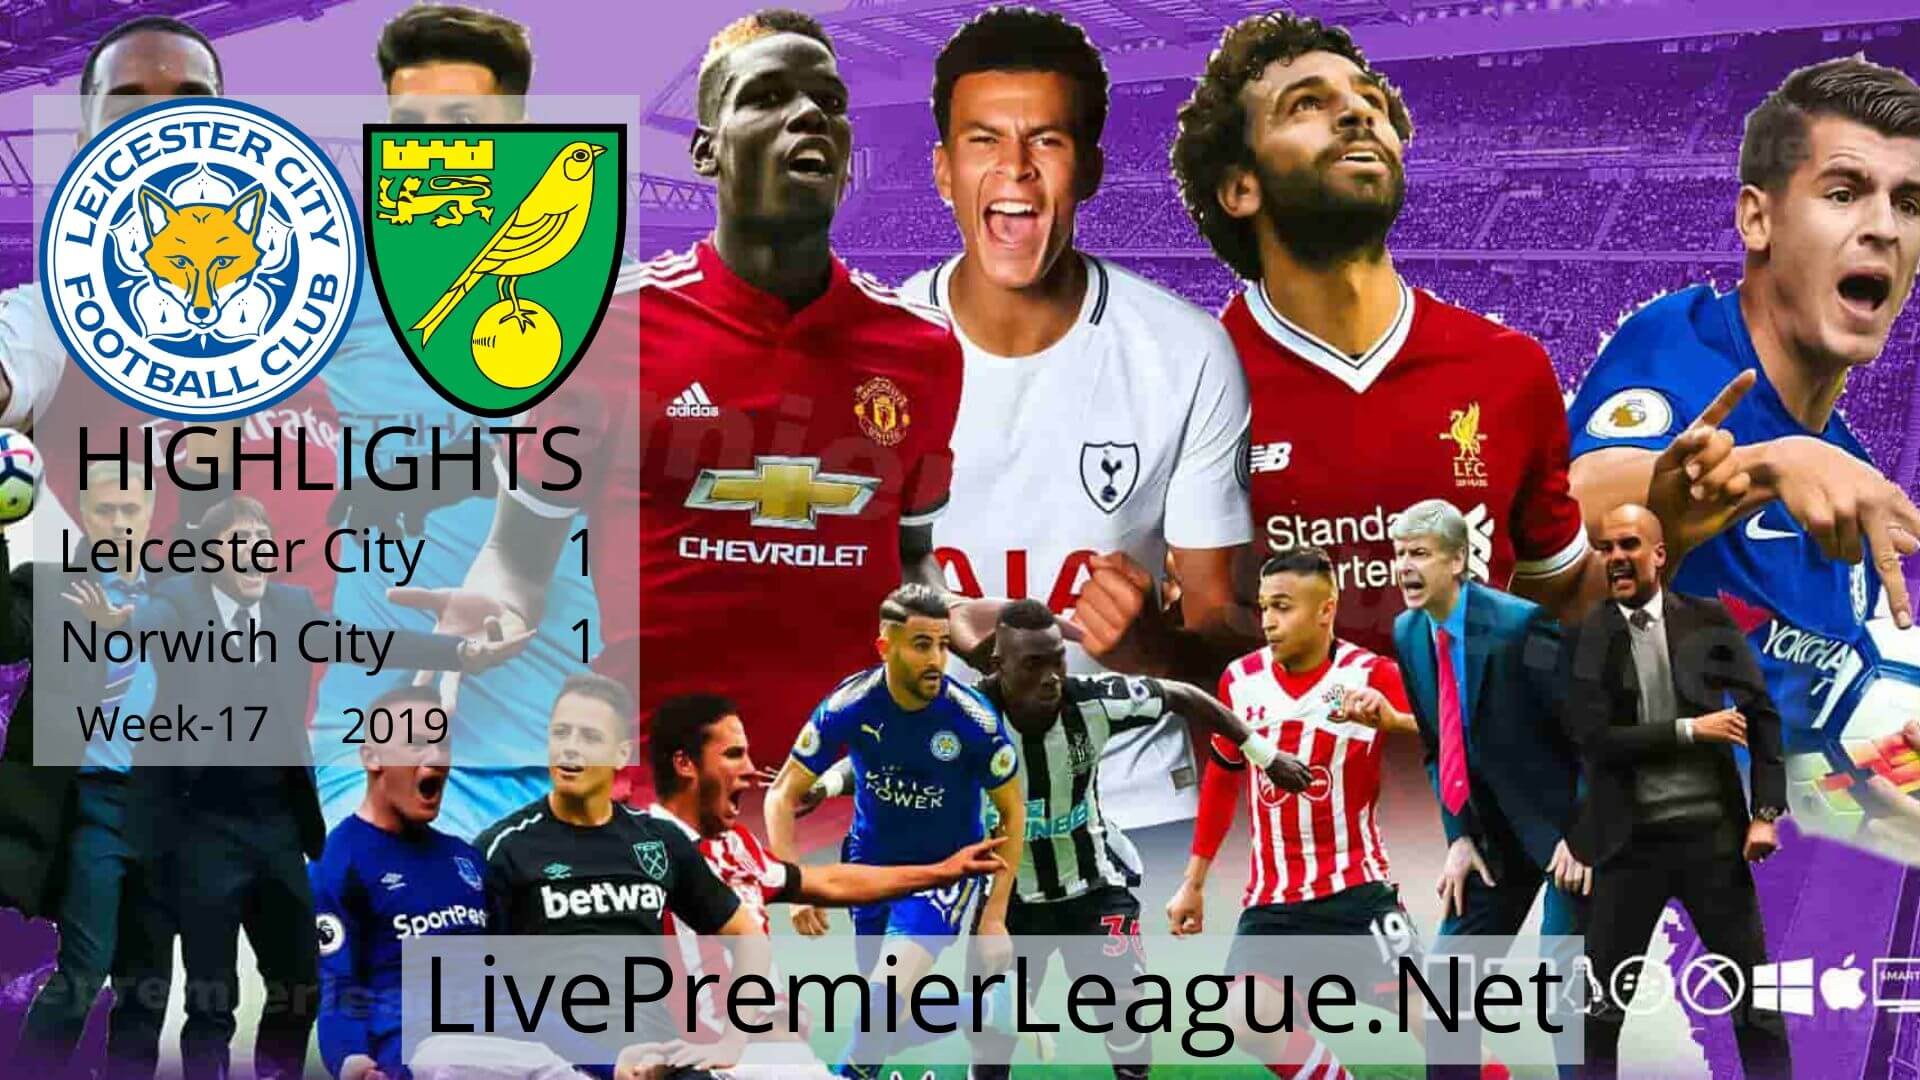 Leicester City Vs Norwich City Highlights 2019 Week 117